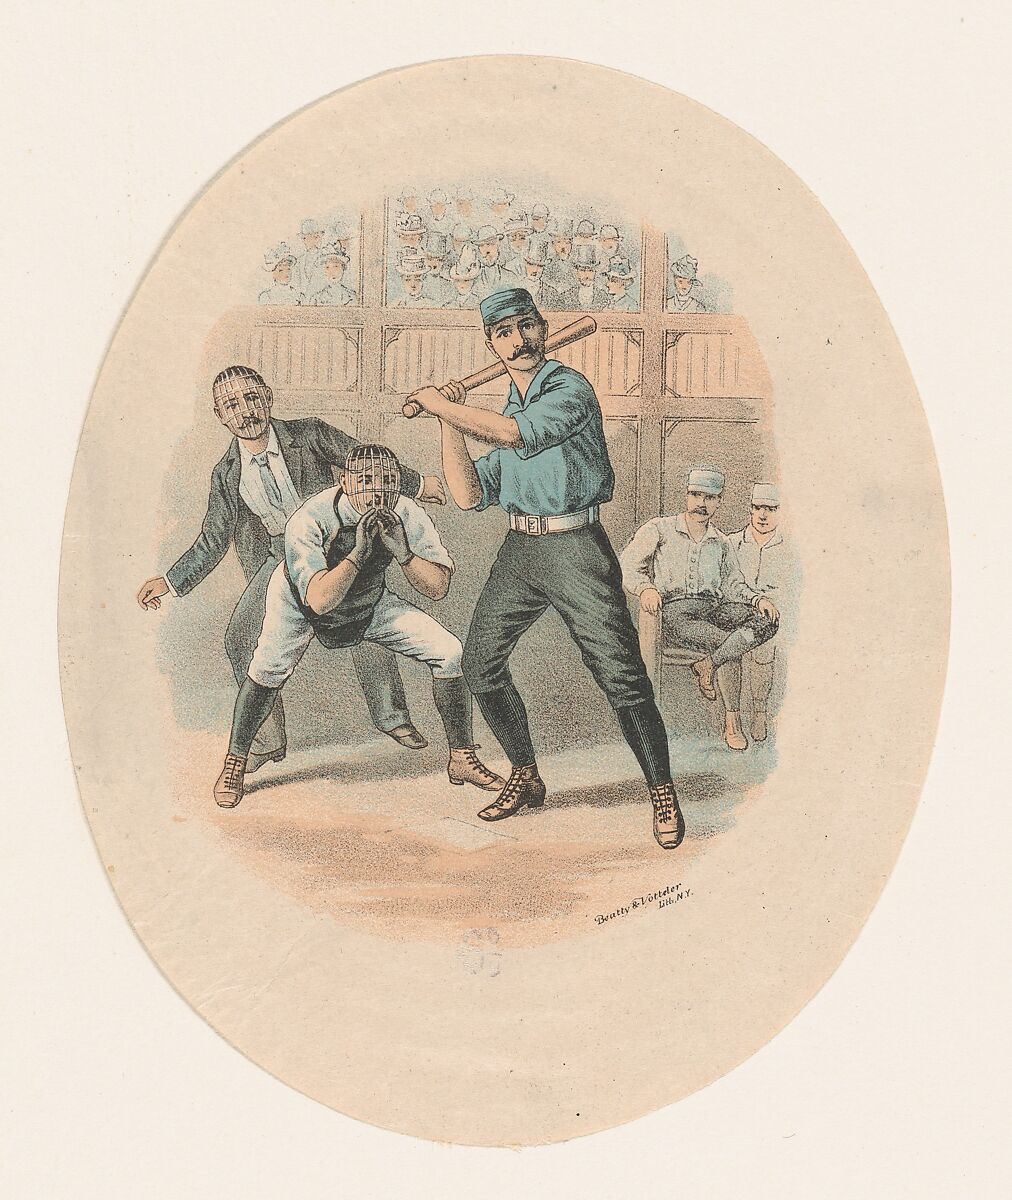 Baseball Scene, Beatty and Votteler (American, 1880–1900), Color lithograph 